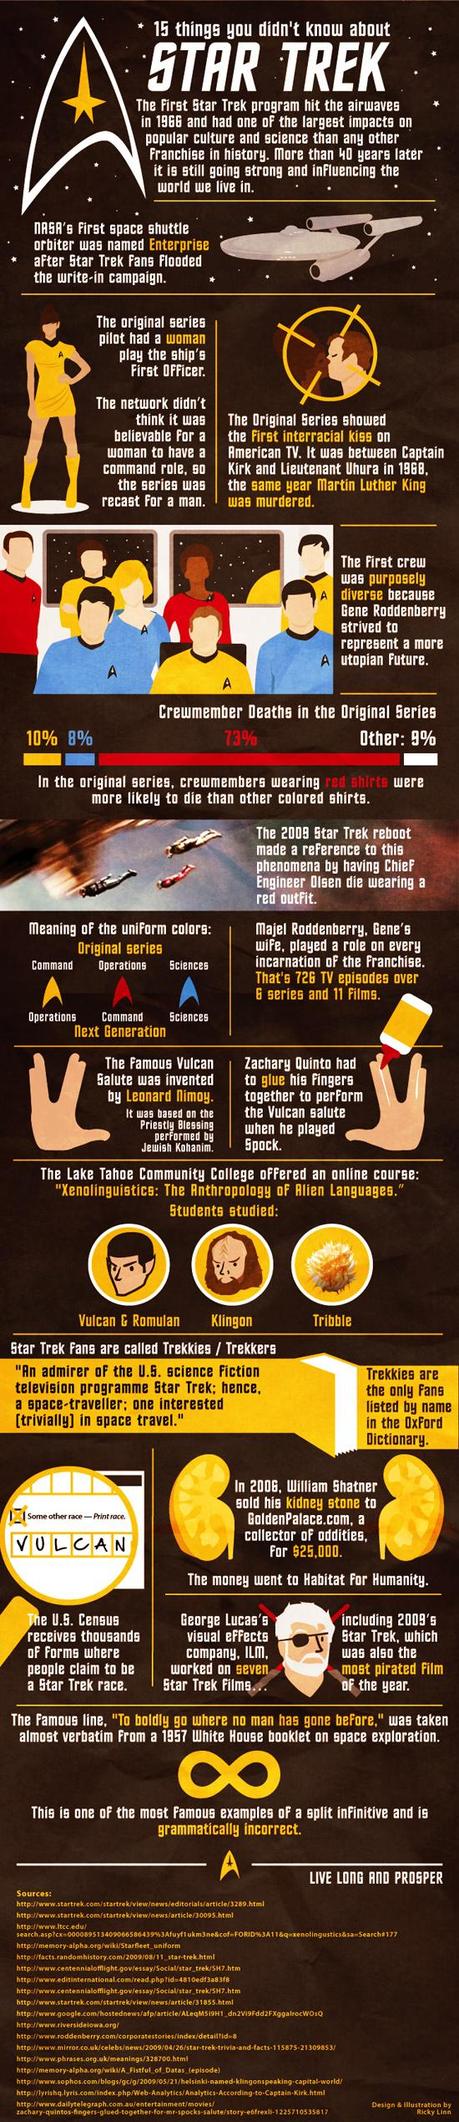 15 Things You Did Not Know About Star Trek Infographic